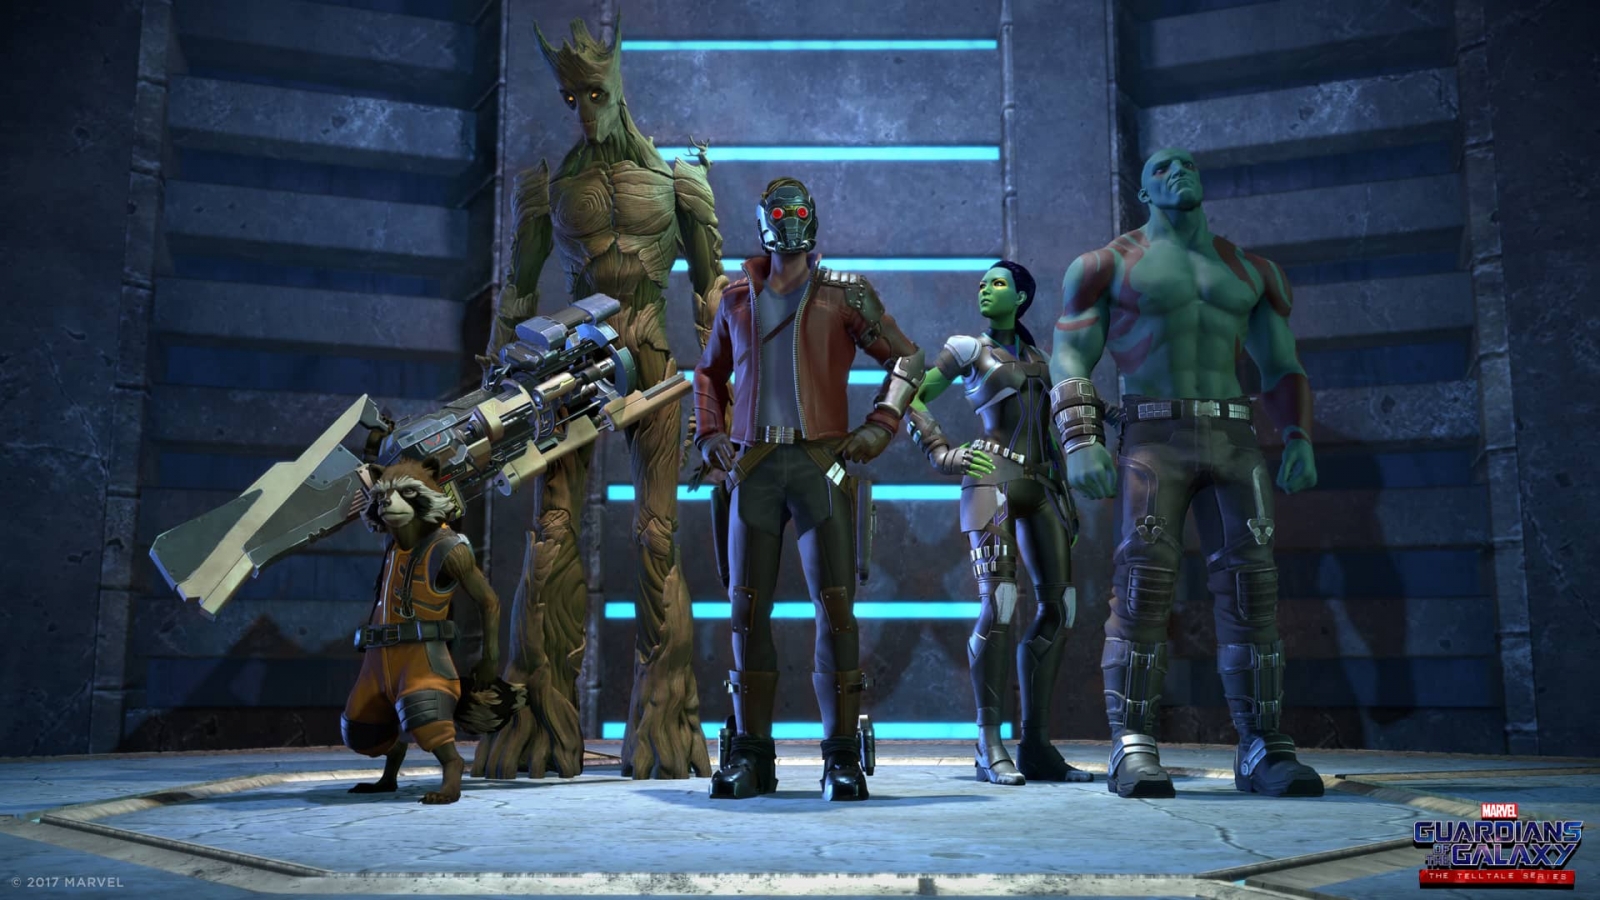 telltale-s-guardians-of-the-galaxy-game-to-premiere-this-spring-voice-cast-revealed